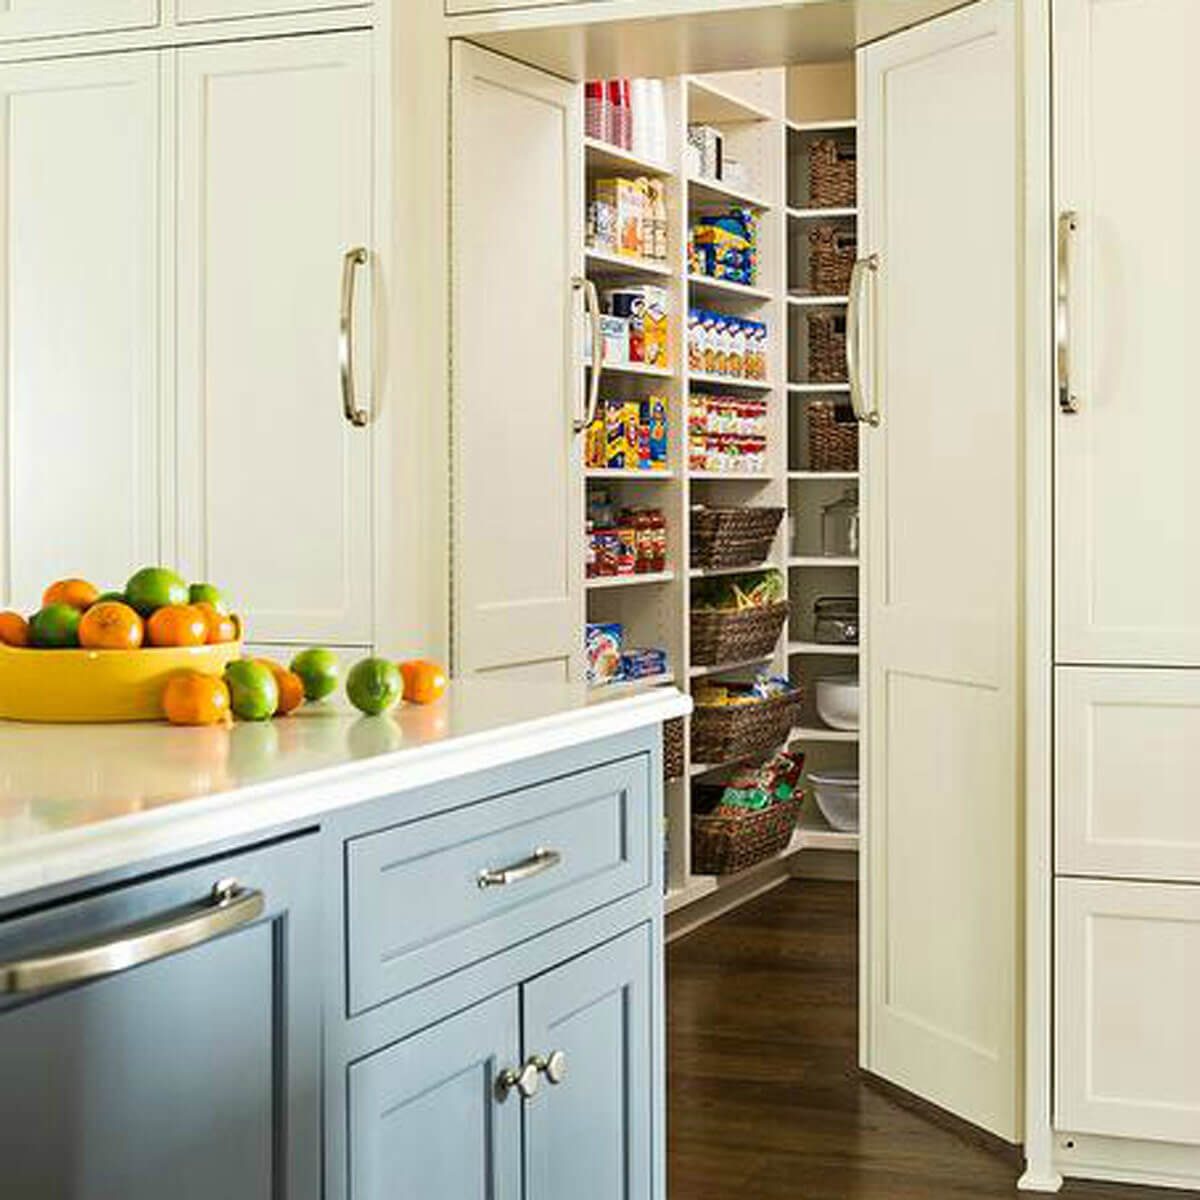 10 Genius Ideas For Building A Pantry, How To Build A Kitchen Pantry Cabinet